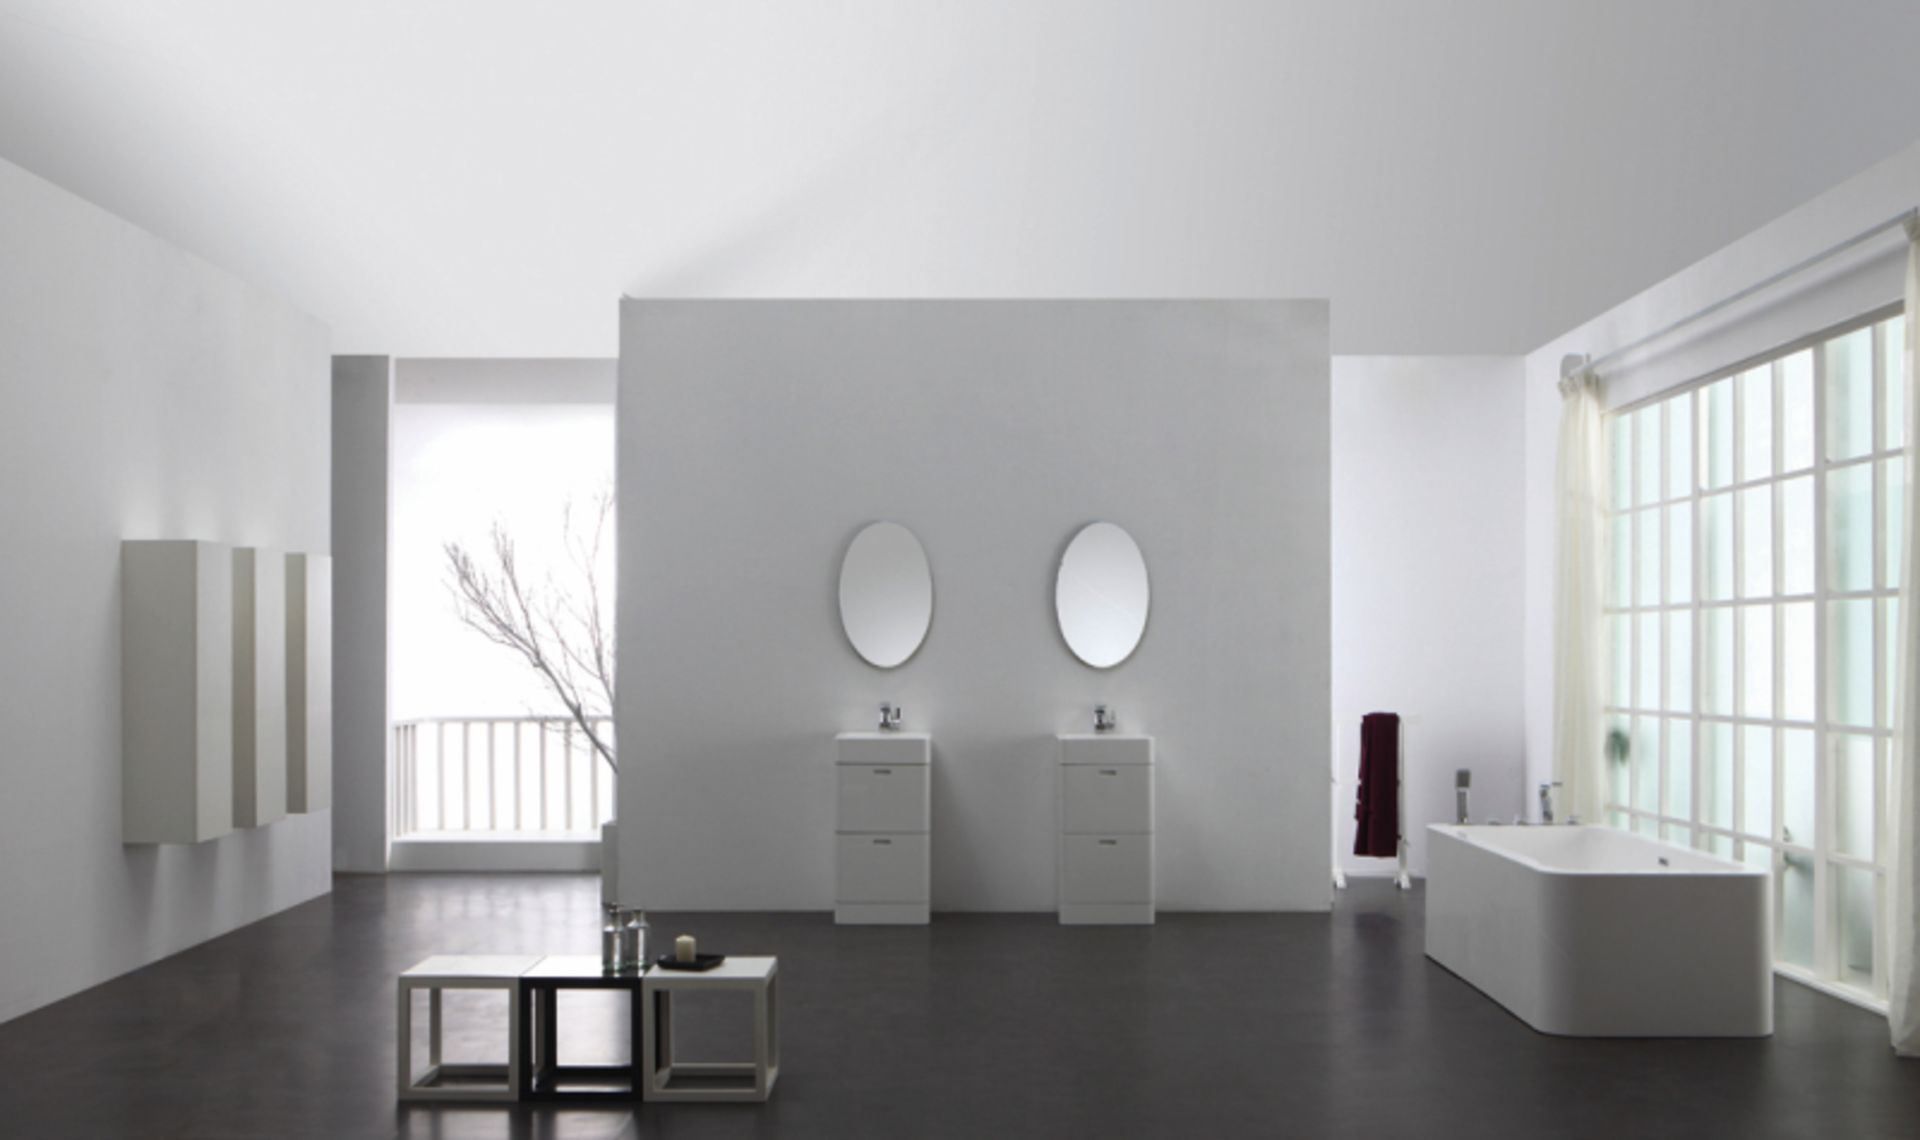 1 x Stylish Bathroom Oval Mirror 45 with top light - A-Grade - Ref:AMR14-045 - CL170 - Location: - Image 3 of 4